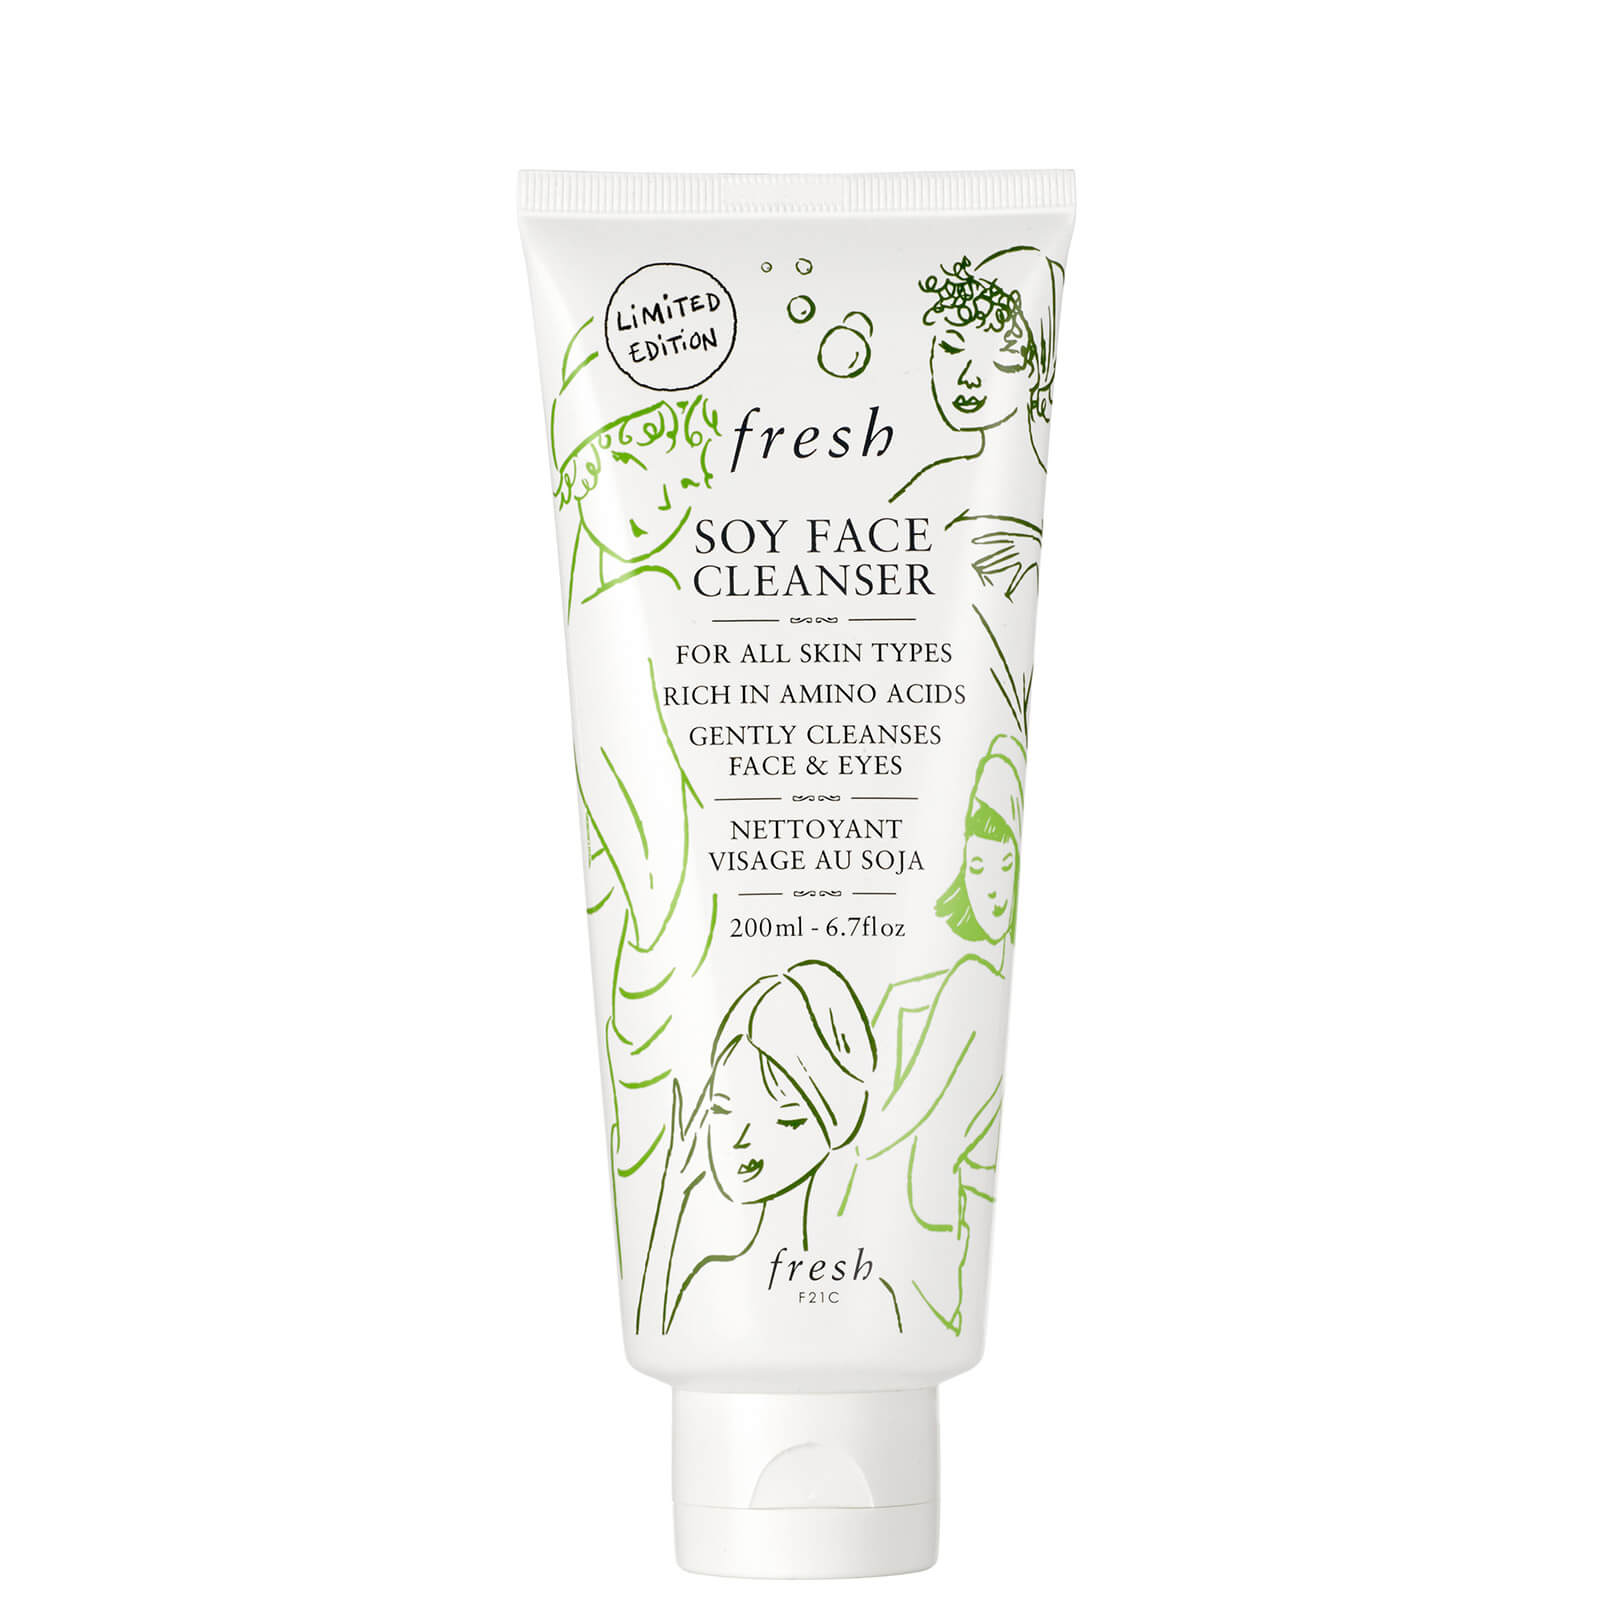 Fresh Limited Edition Soy Face Cleanser 200ml